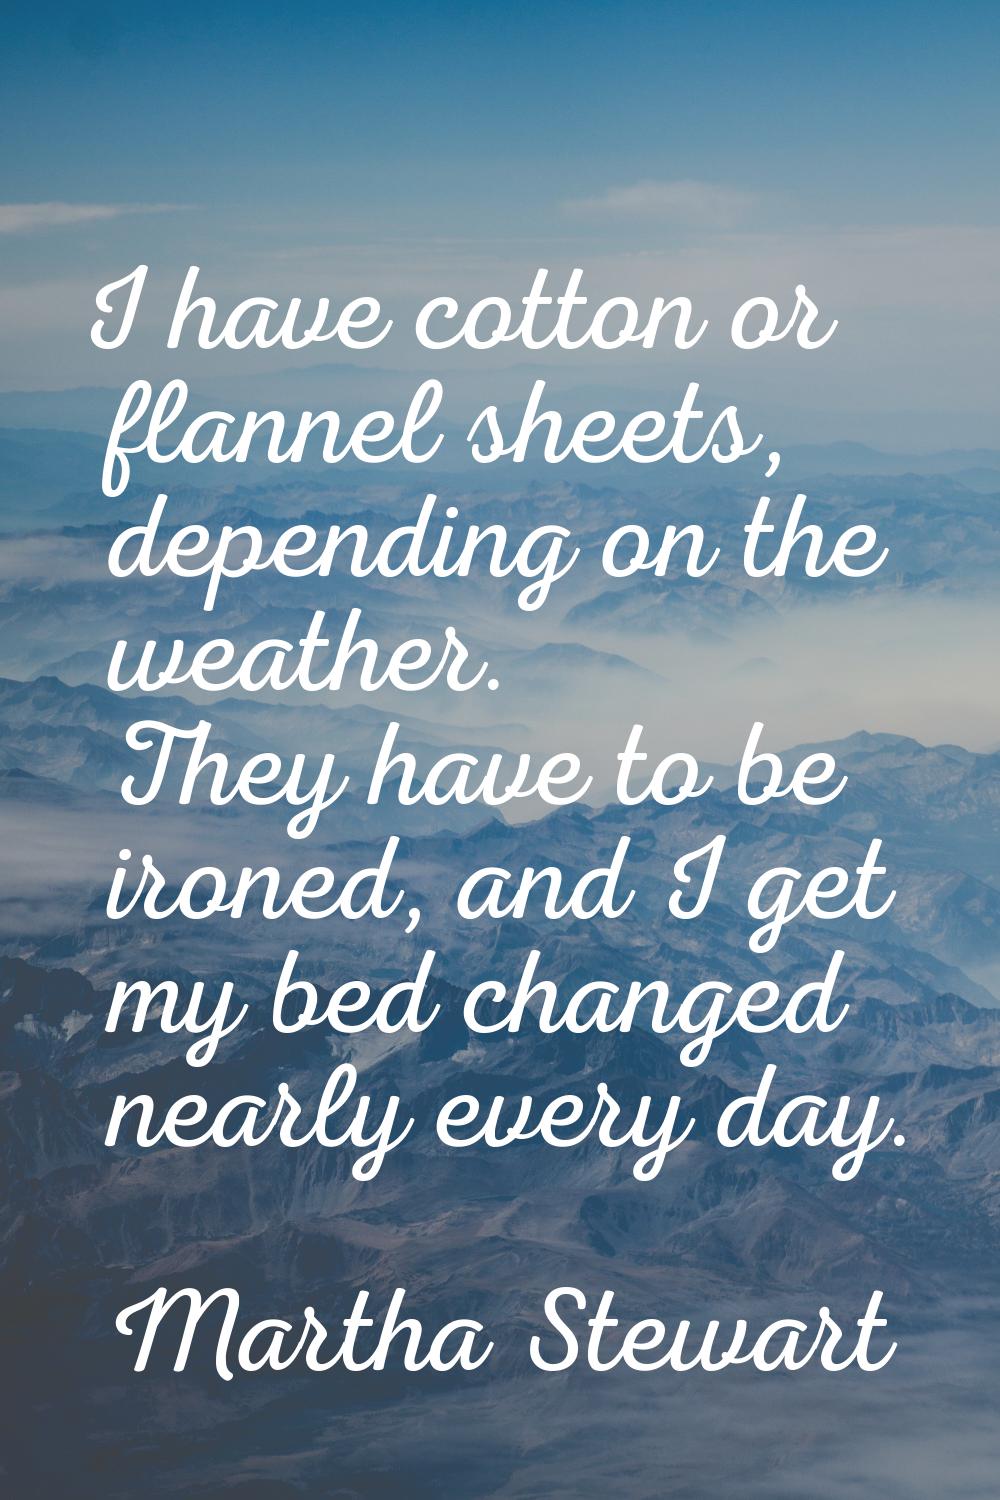 I have cotton or flannel sheets, depending on the weather. They have to be ironed, and I get my bed